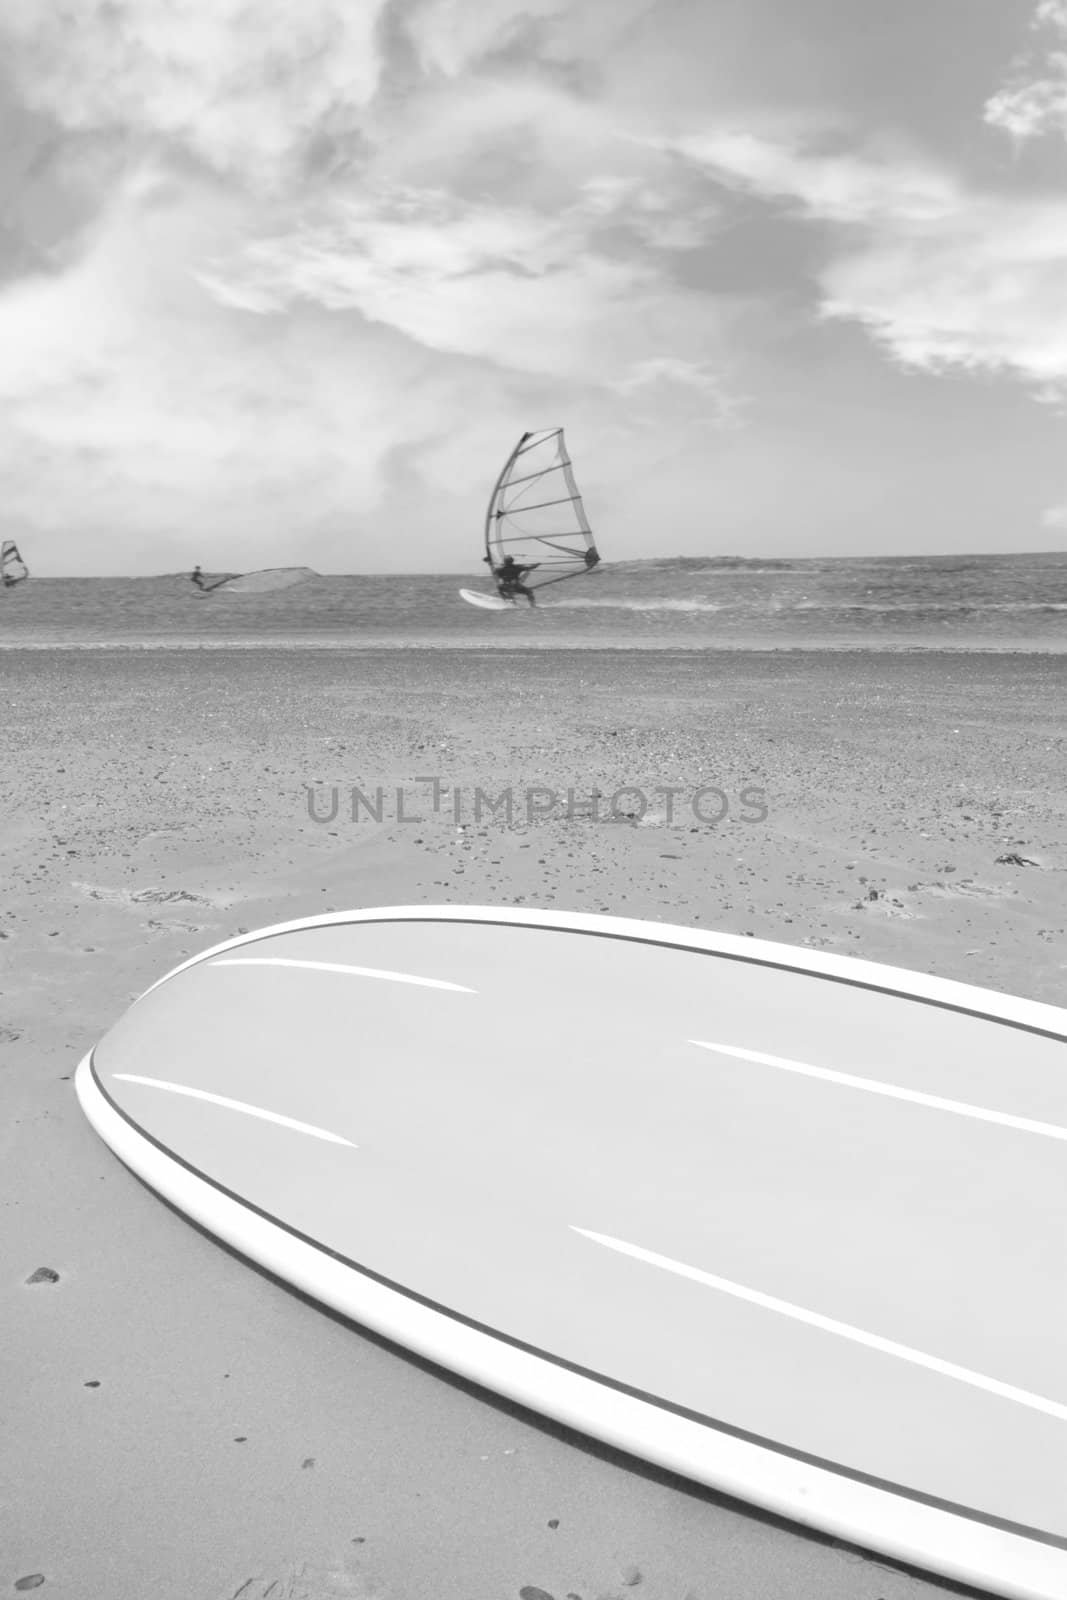 surfboard lying on the beach as surfers windsurf in the maharees in county kerry ireland during a storm in black and white